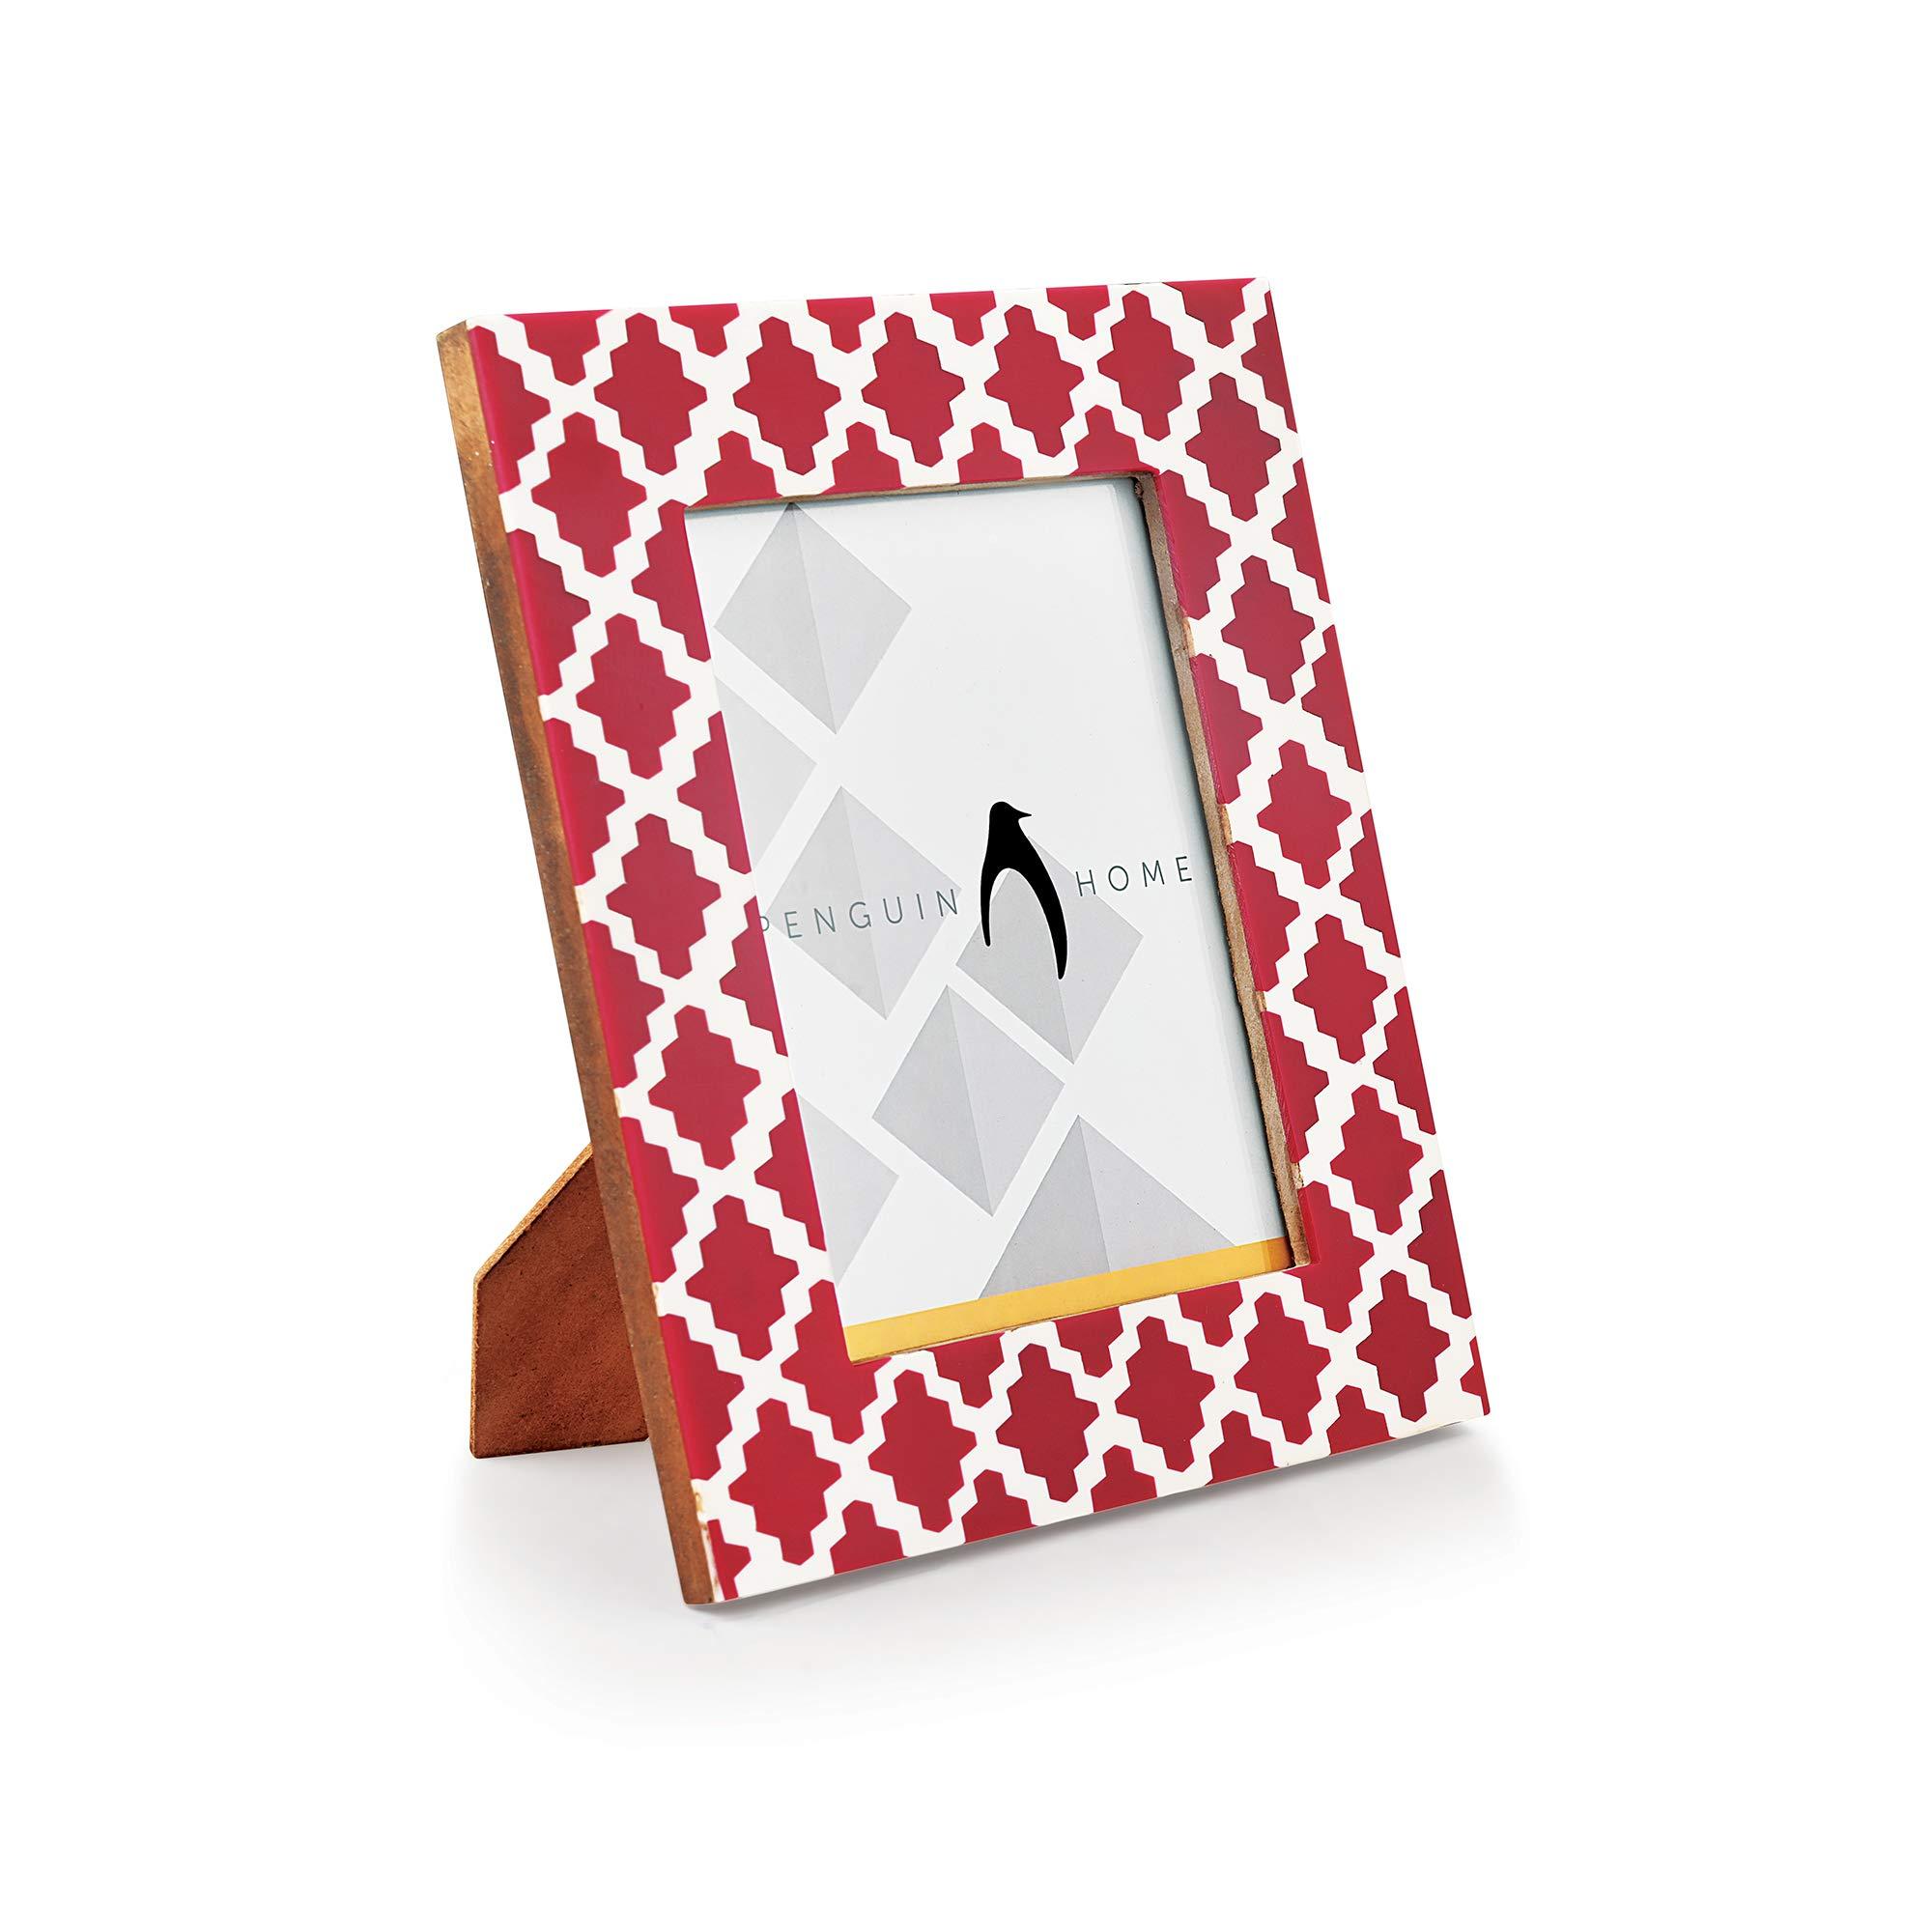 Penguin Home Photo Frame 6x4 in Pink Criss-Cross Design - Portrait and Landscape Orientation - Freestanding and Wall Mount Compatible